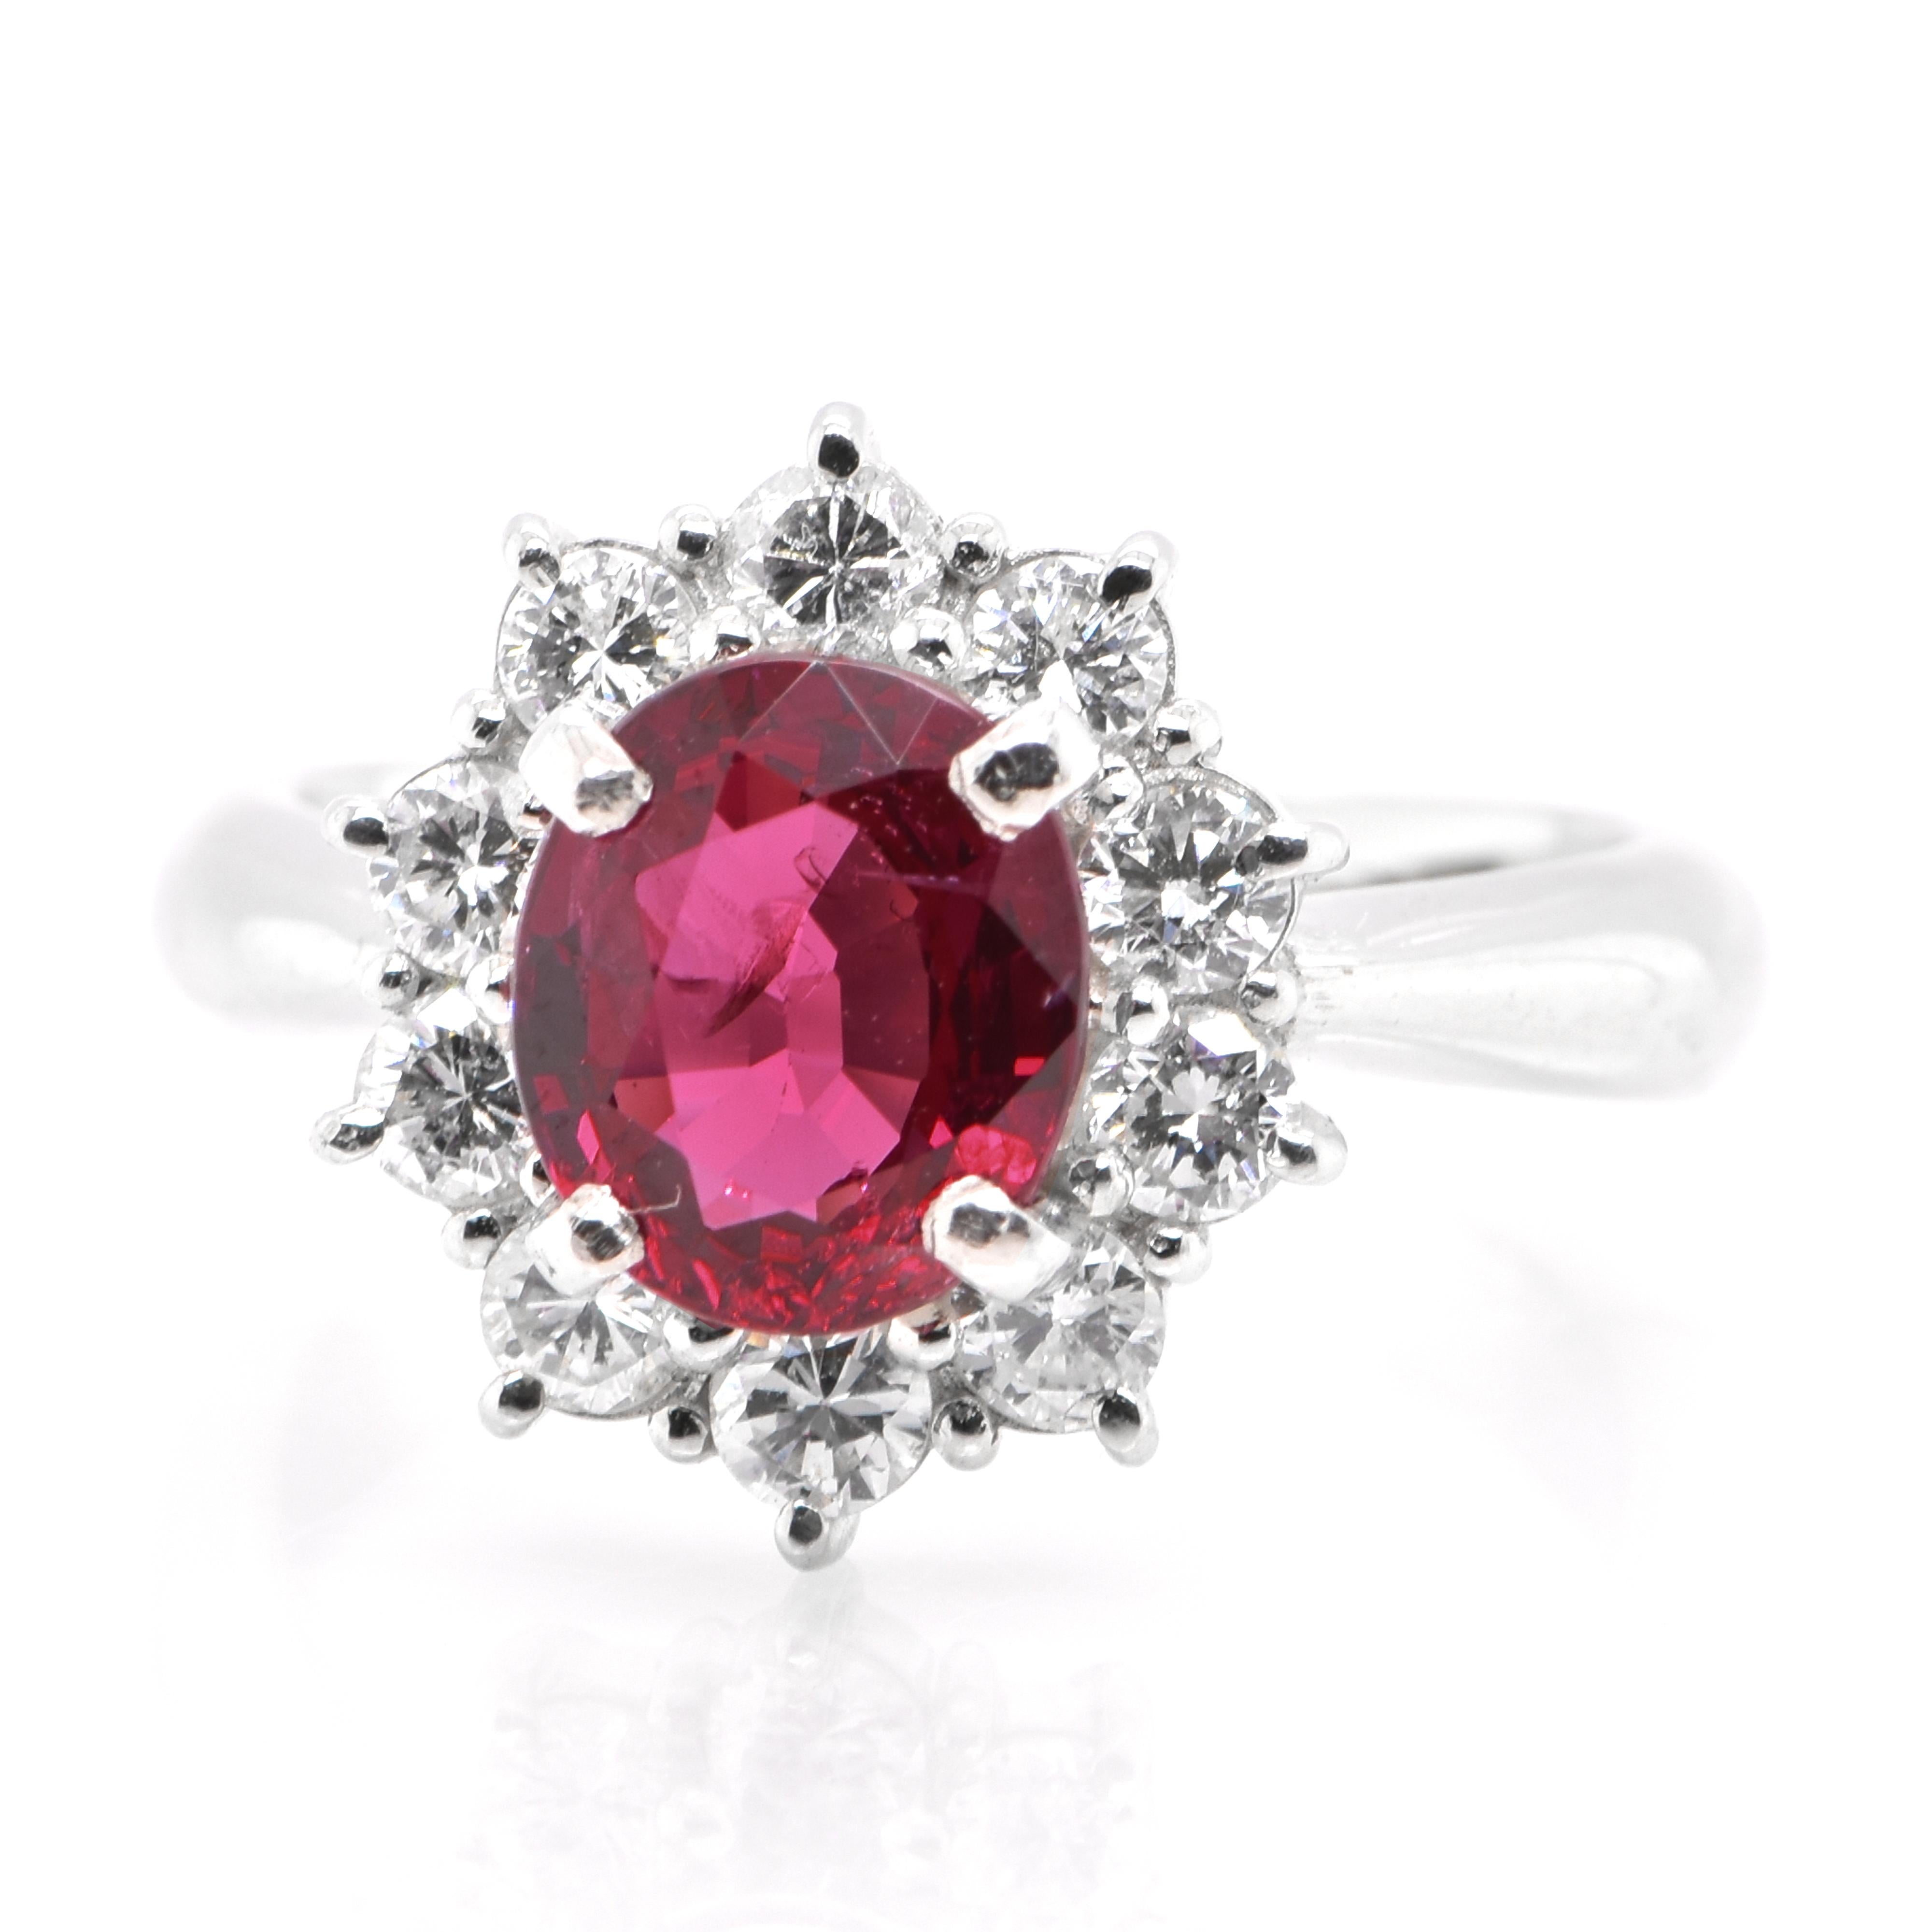 A beautiful halo ring featuring a 1.83 Carat Natural Red Spinel and 0.61 Carats of Diamond Accents set in Platinum. Spinel has been frequently confused with ruby, but it’s a gem that can stand on its own merits. Many historically important red gems,